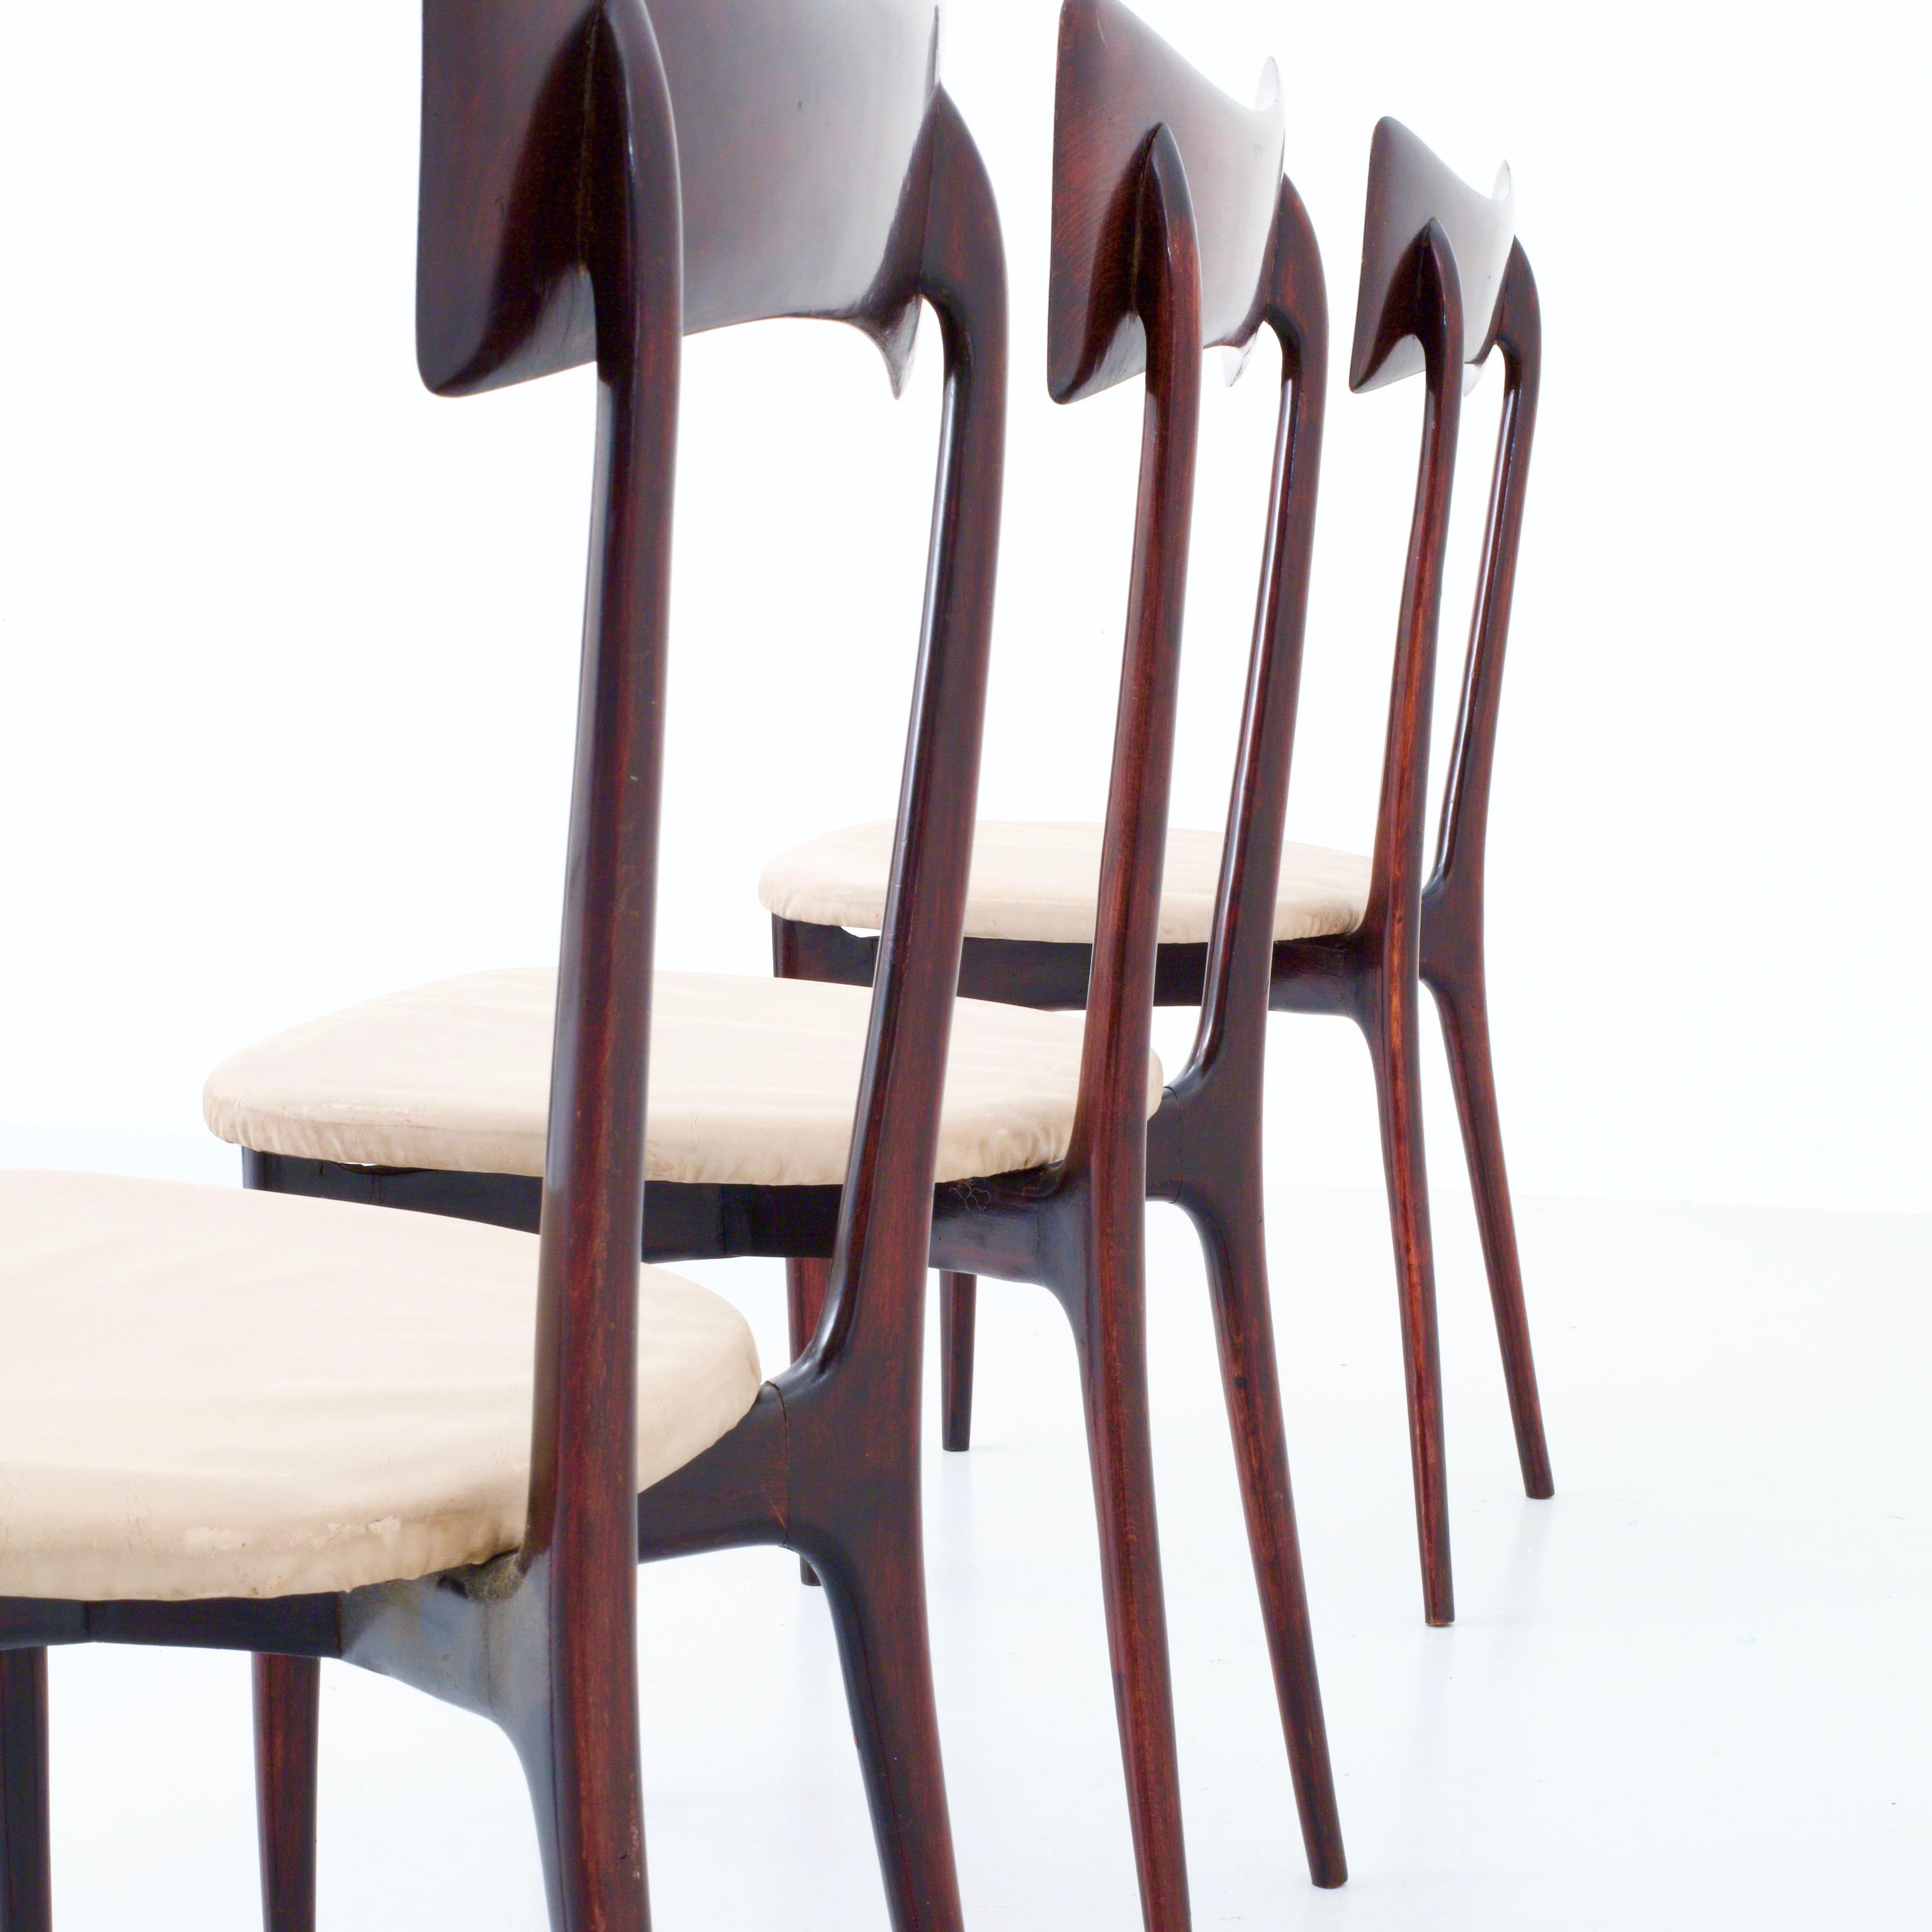 Mid-20th Century Set of 3 Dining Chairs by Ico & Luisa Parisi for Ariberto Colombo, Italy, 1955